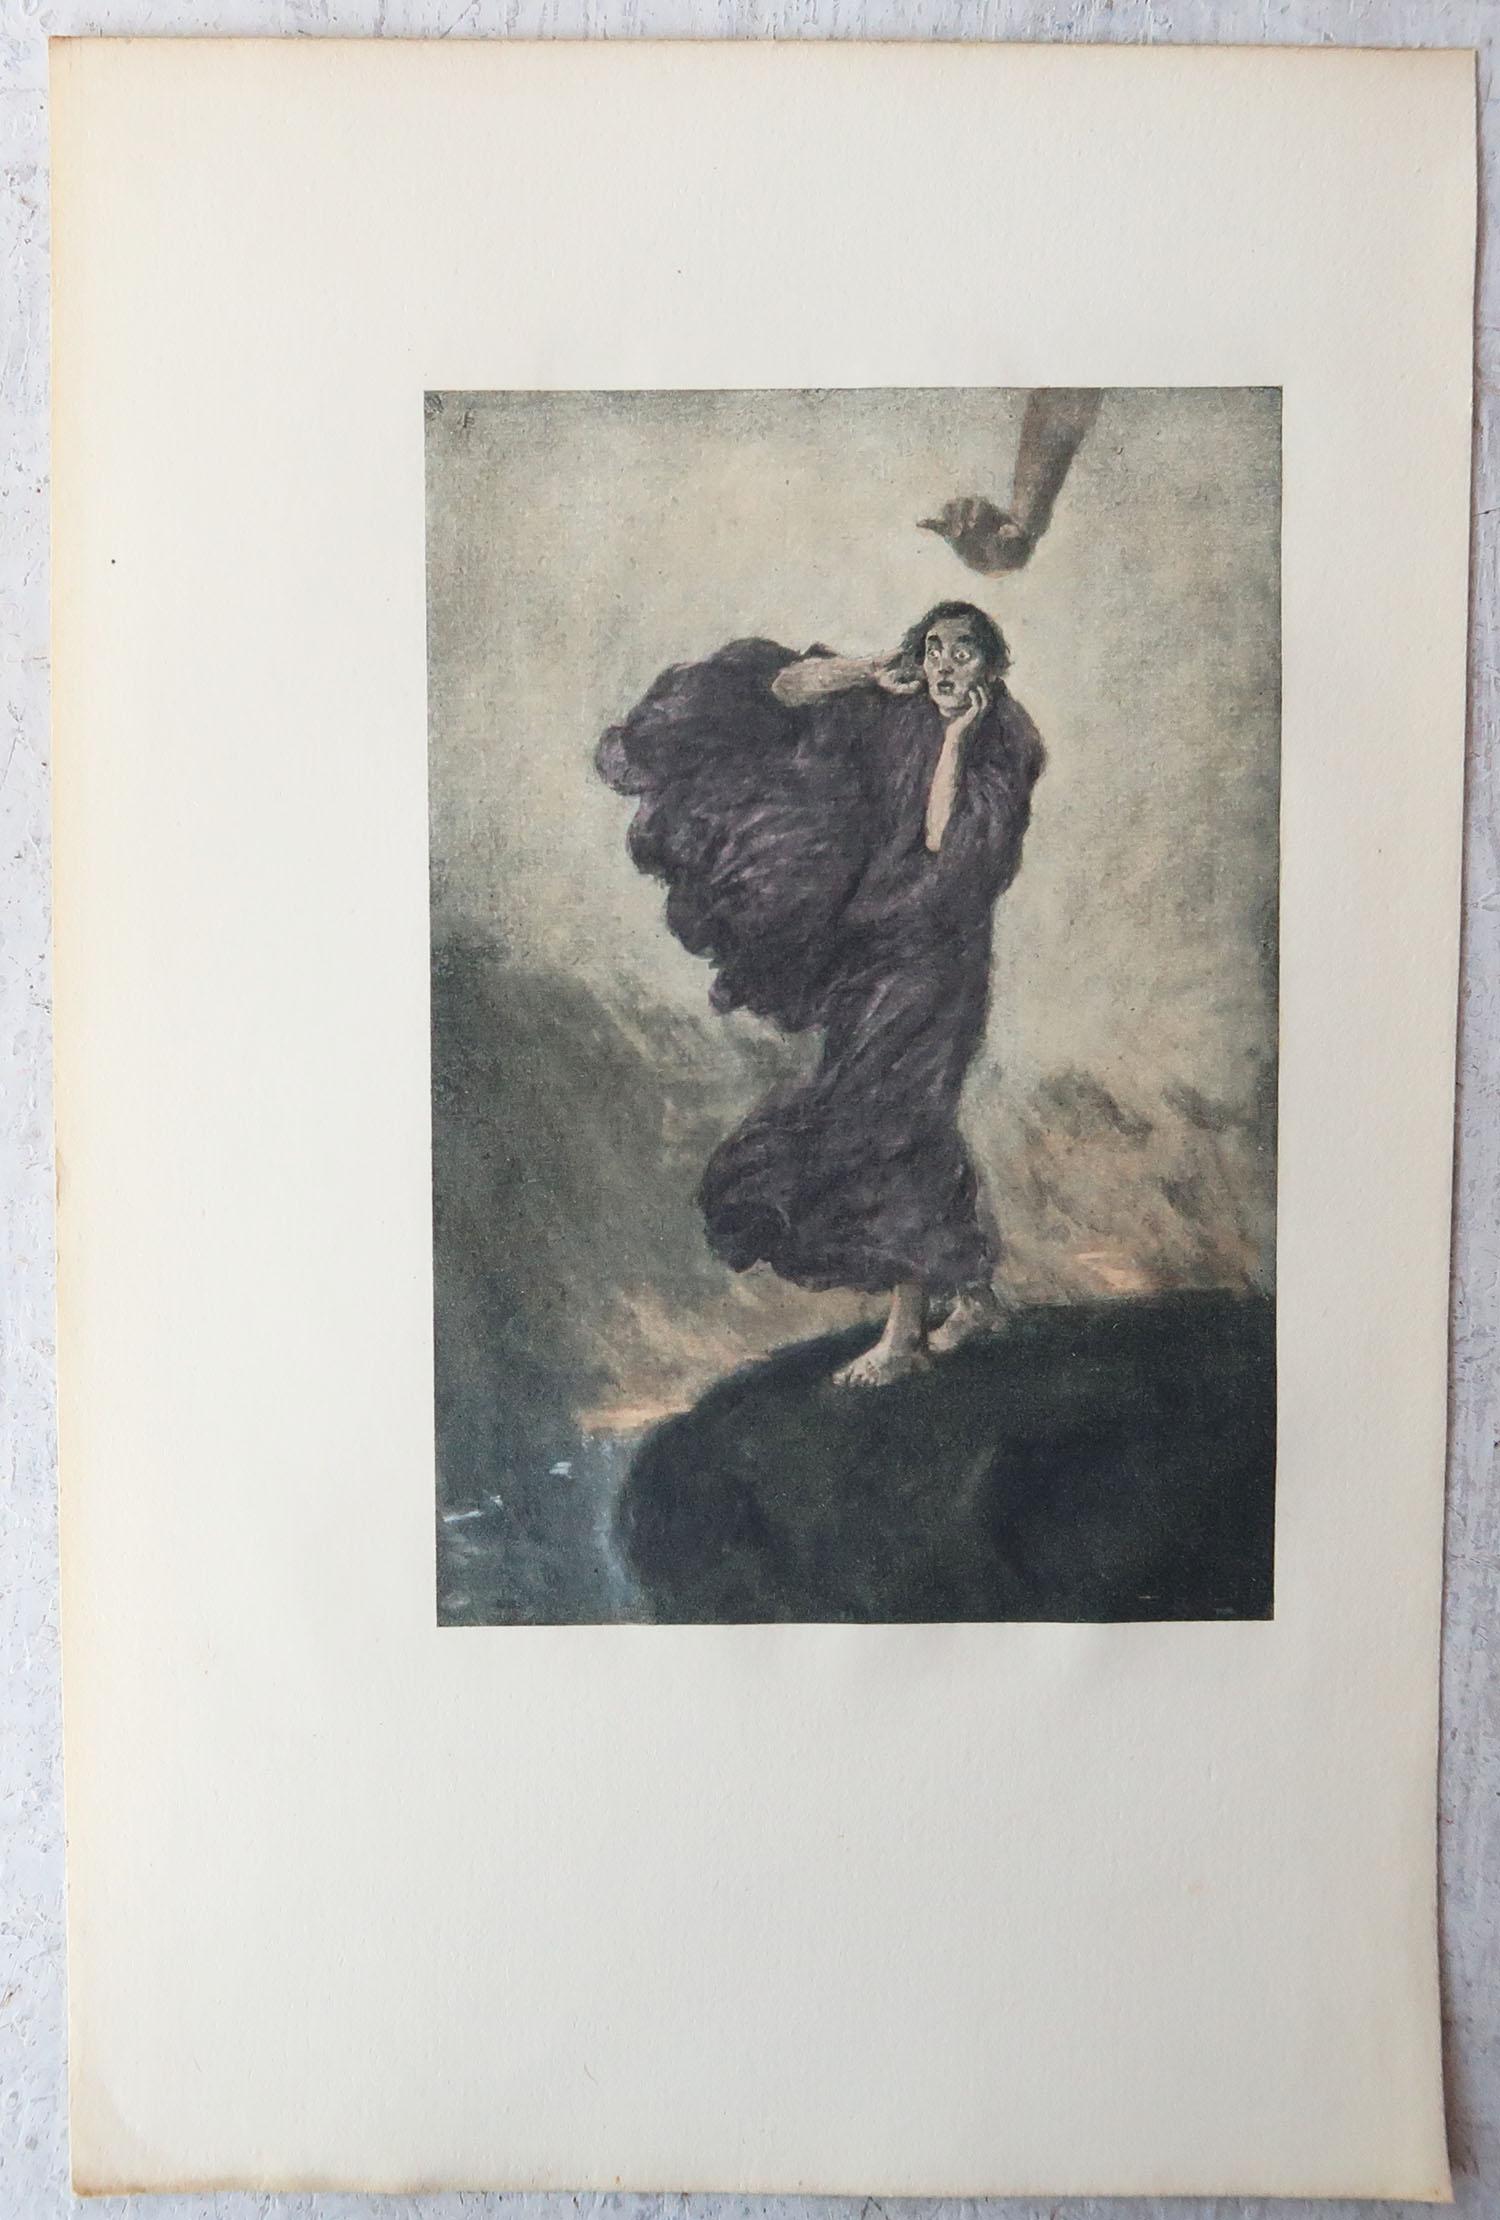 Romantic Original Limited Edition Print by Frederick S. Coburn, Imp of The Perverse, 1902